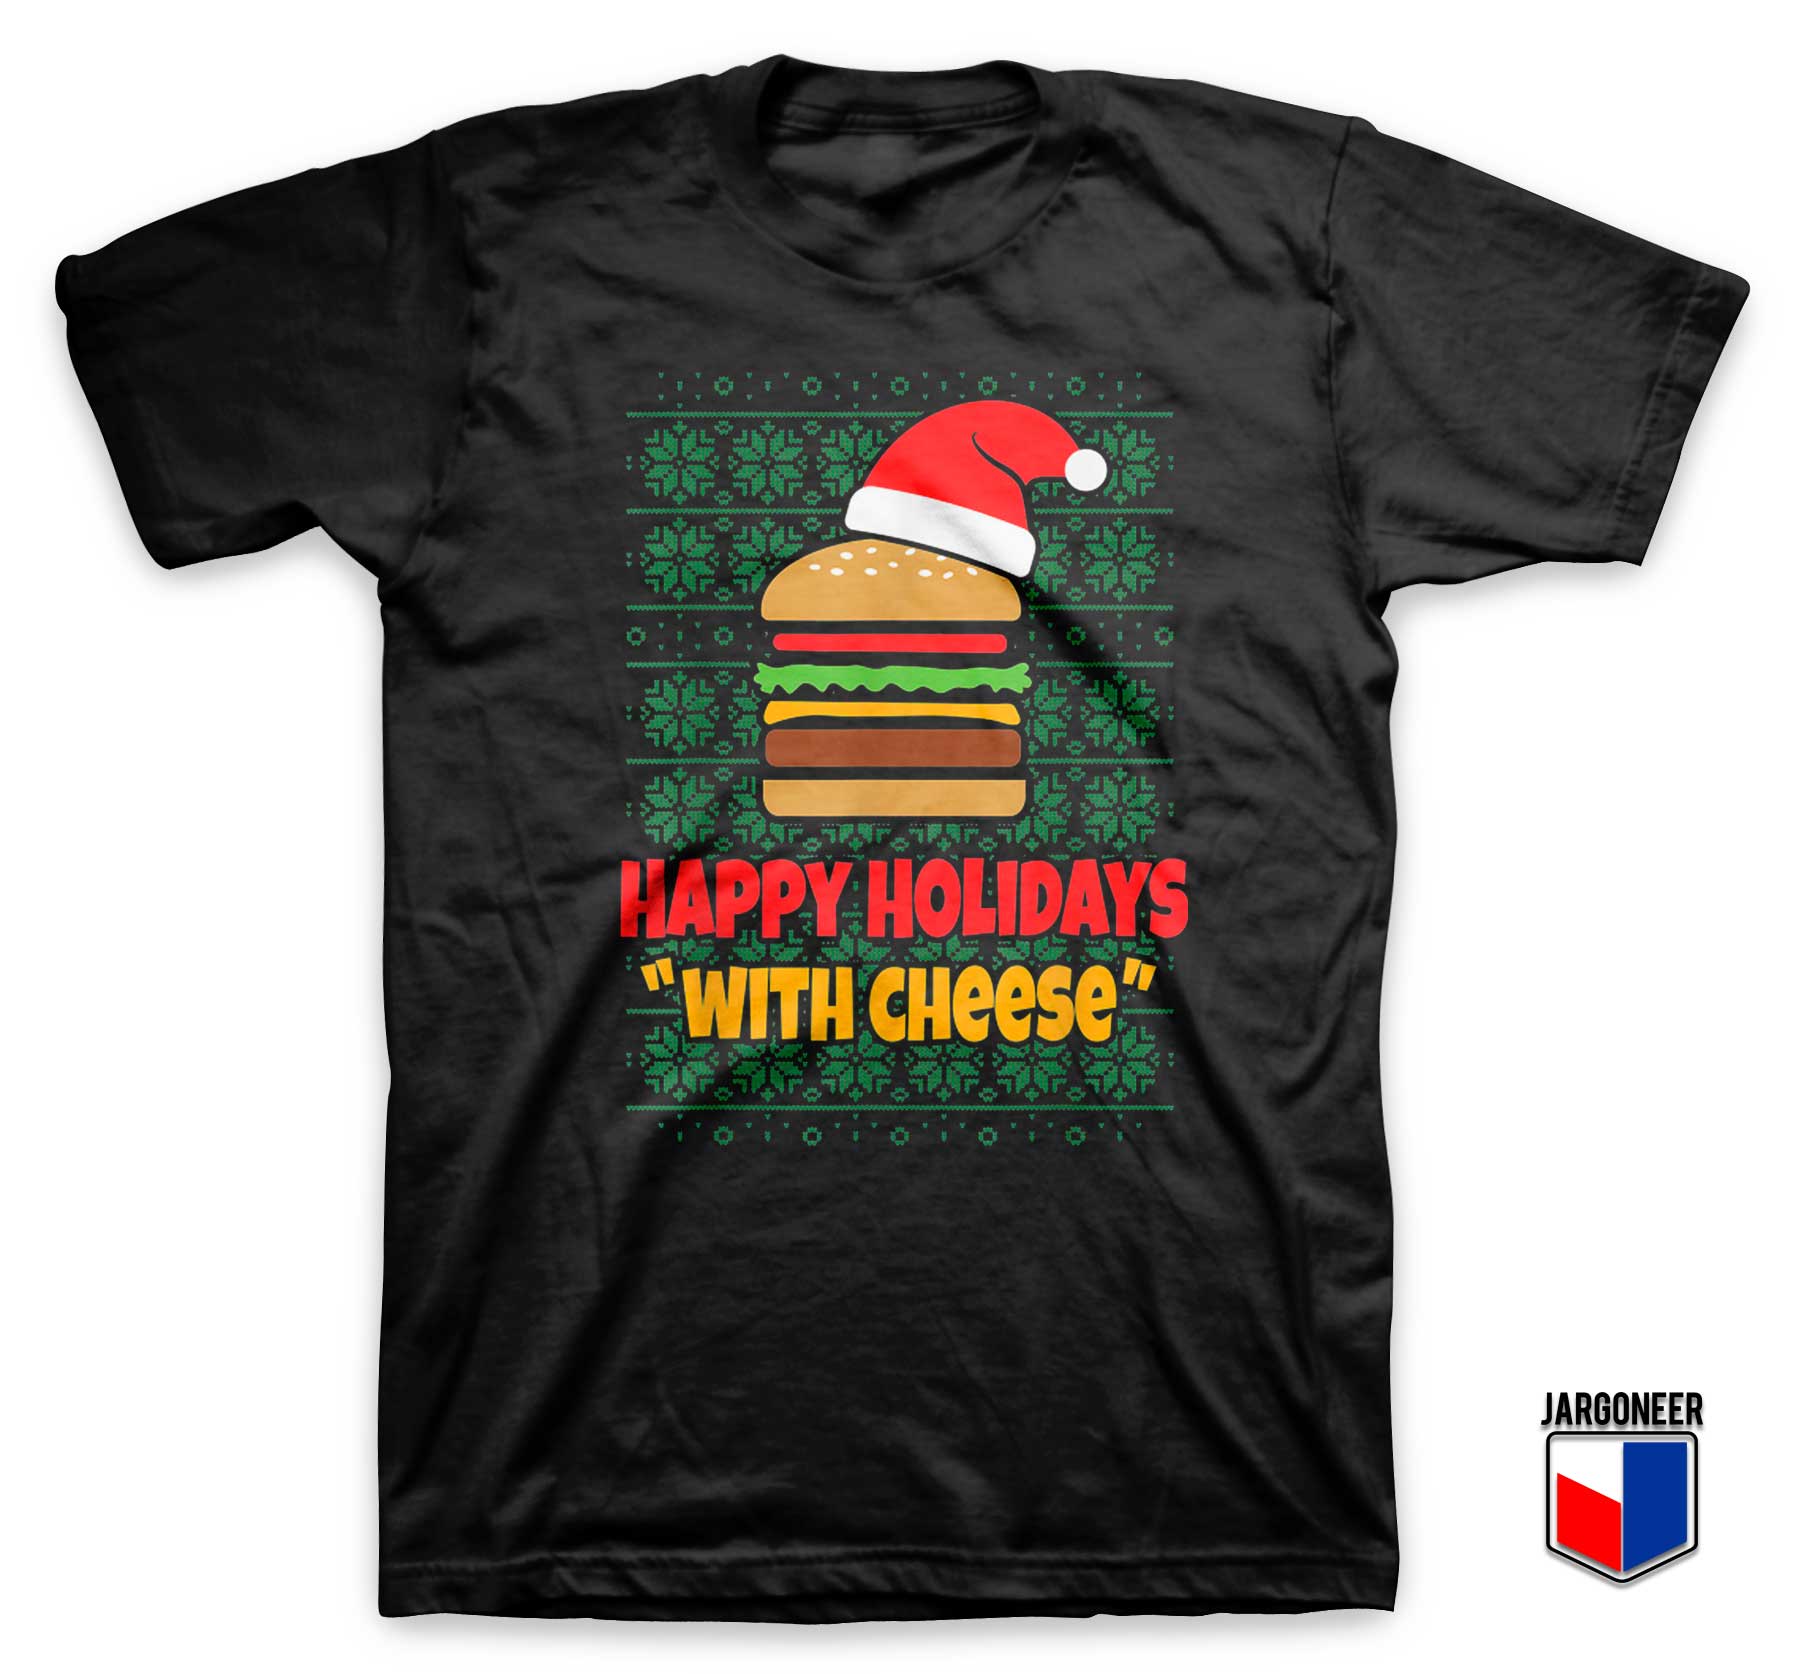 Happy Holidays With Cheese Christmas T Shirt - Shop Unique Graphic Cool Shirt Designs